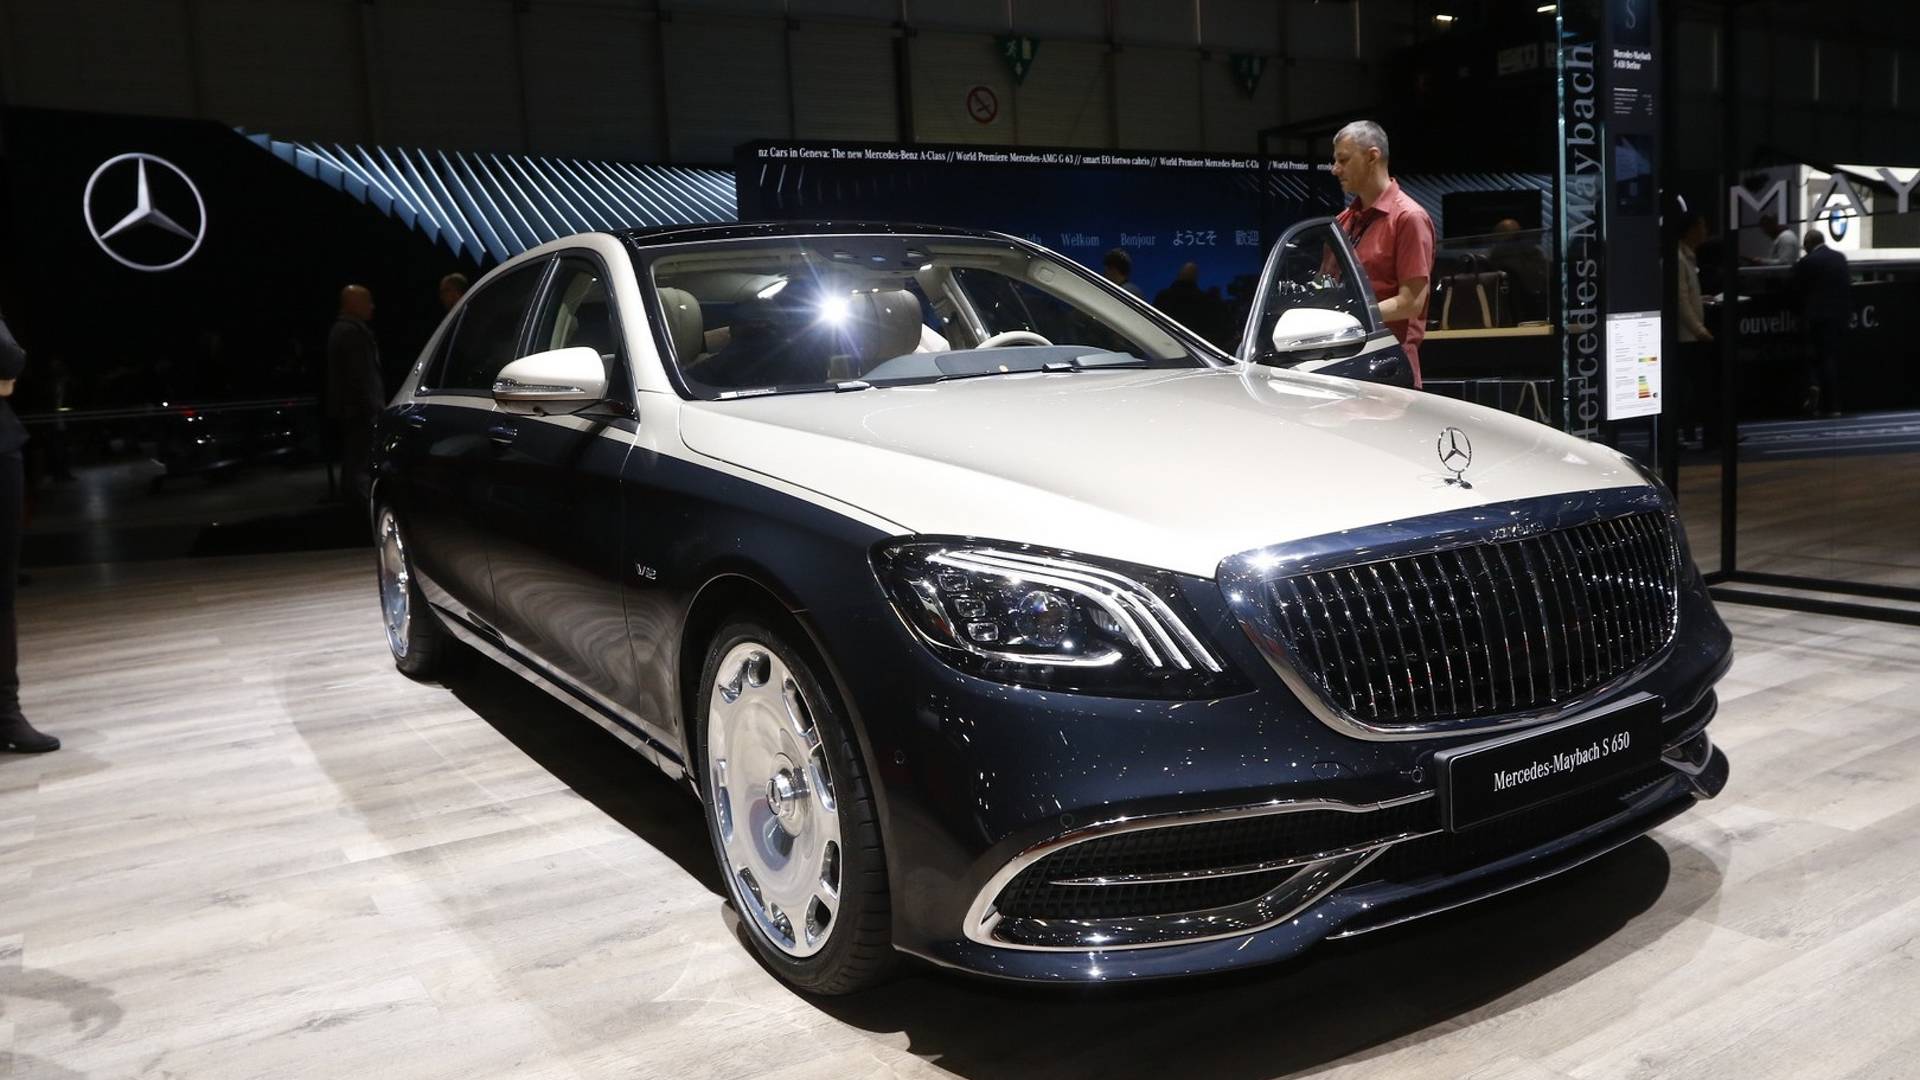 Mercedes-Maybach S-Class Live From Geneva Motor Show